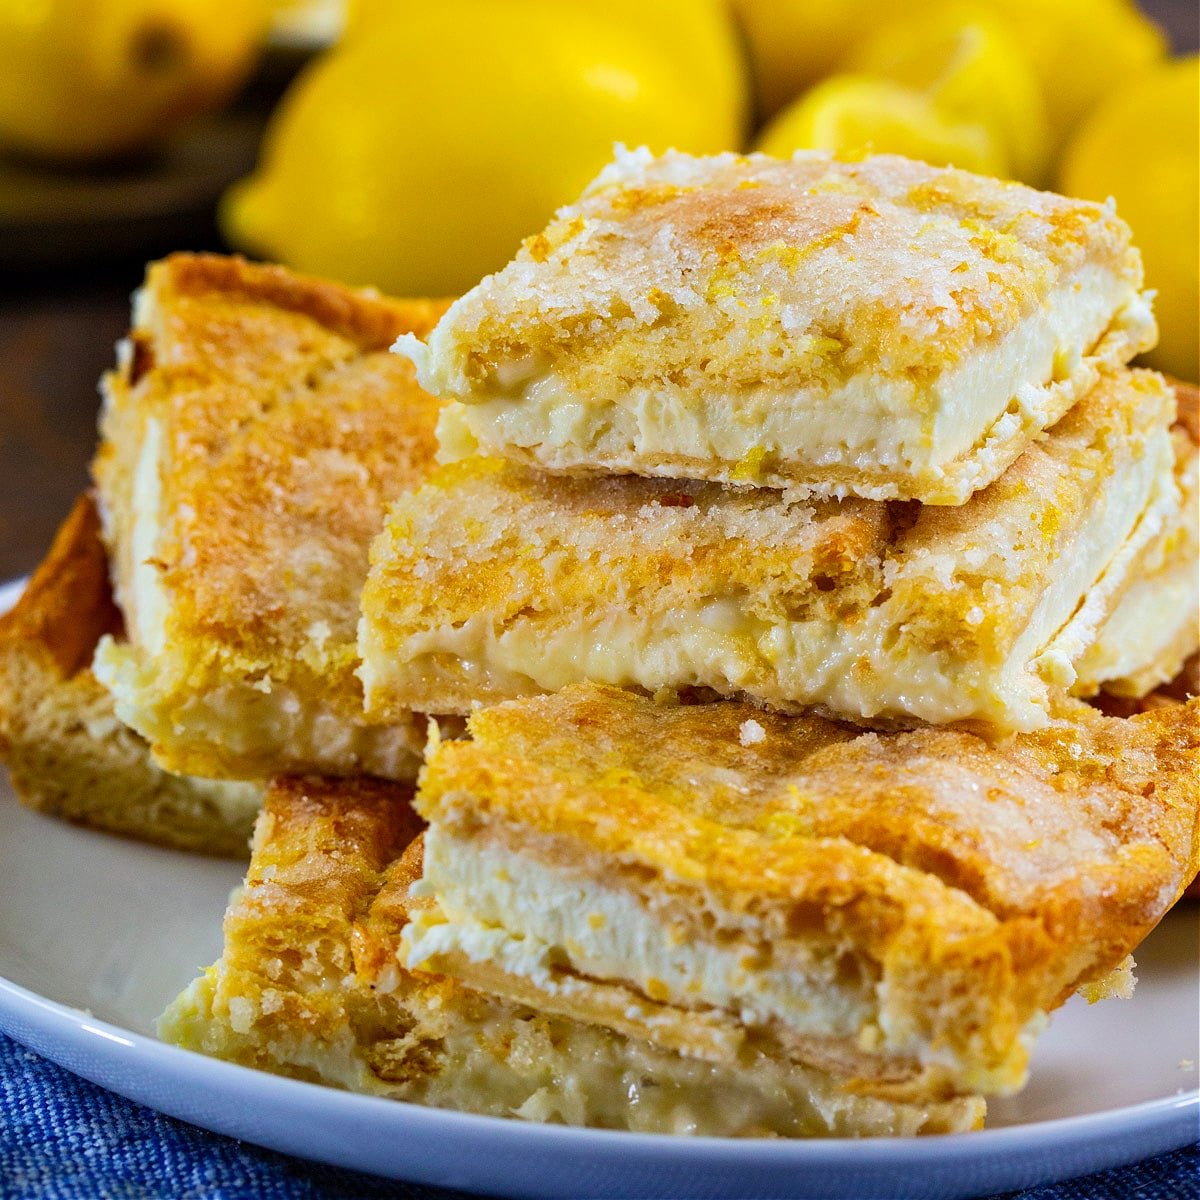 Lemon Cream Cheese Bars stacked on a plate.